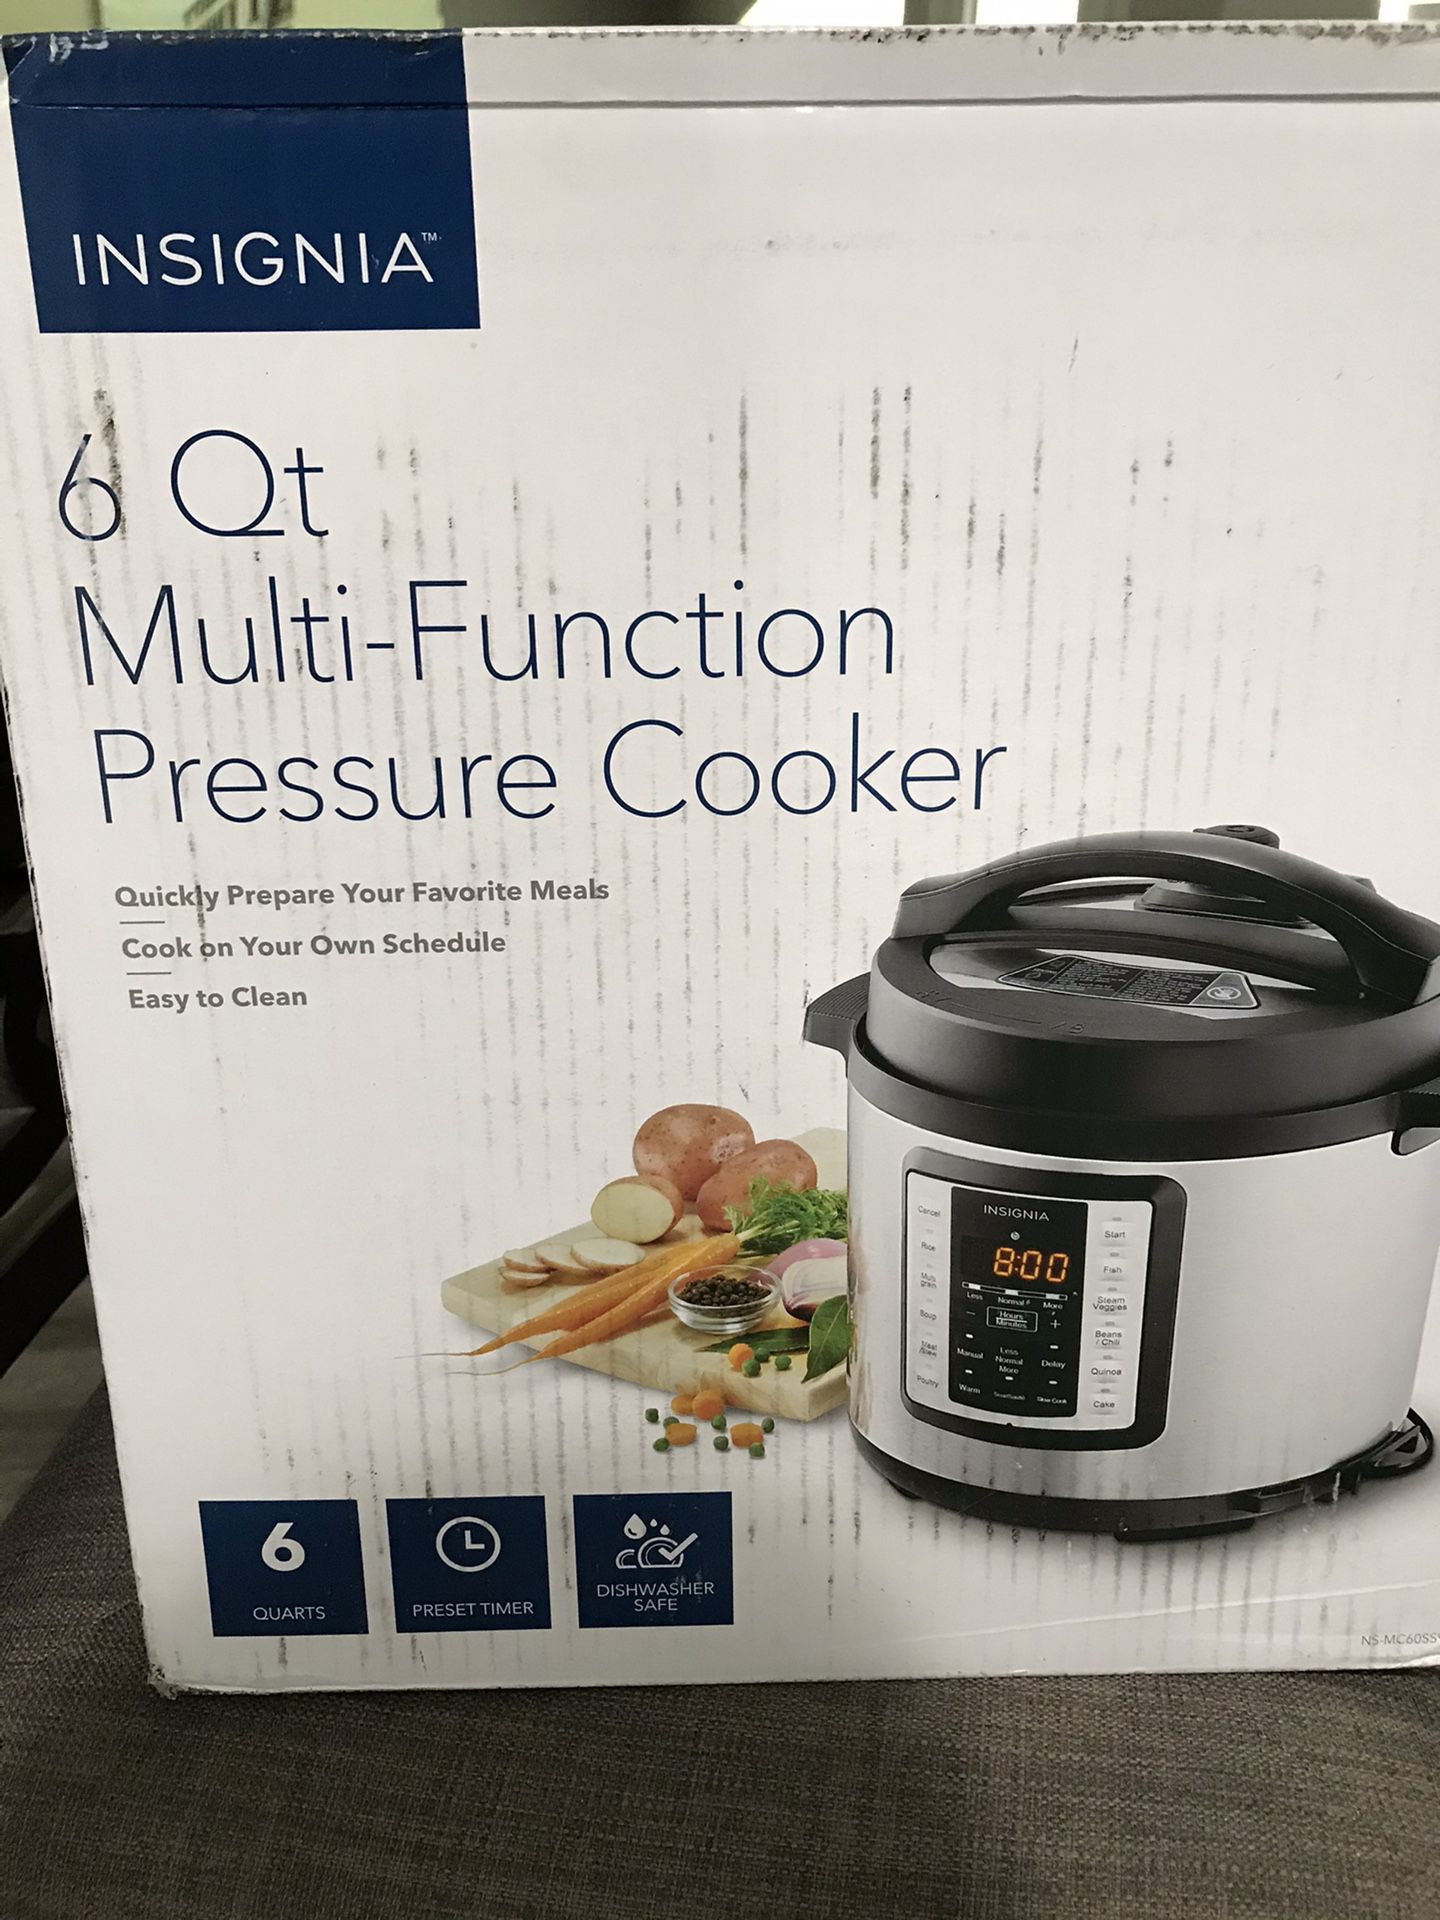 New Pressure cooker (in the box)